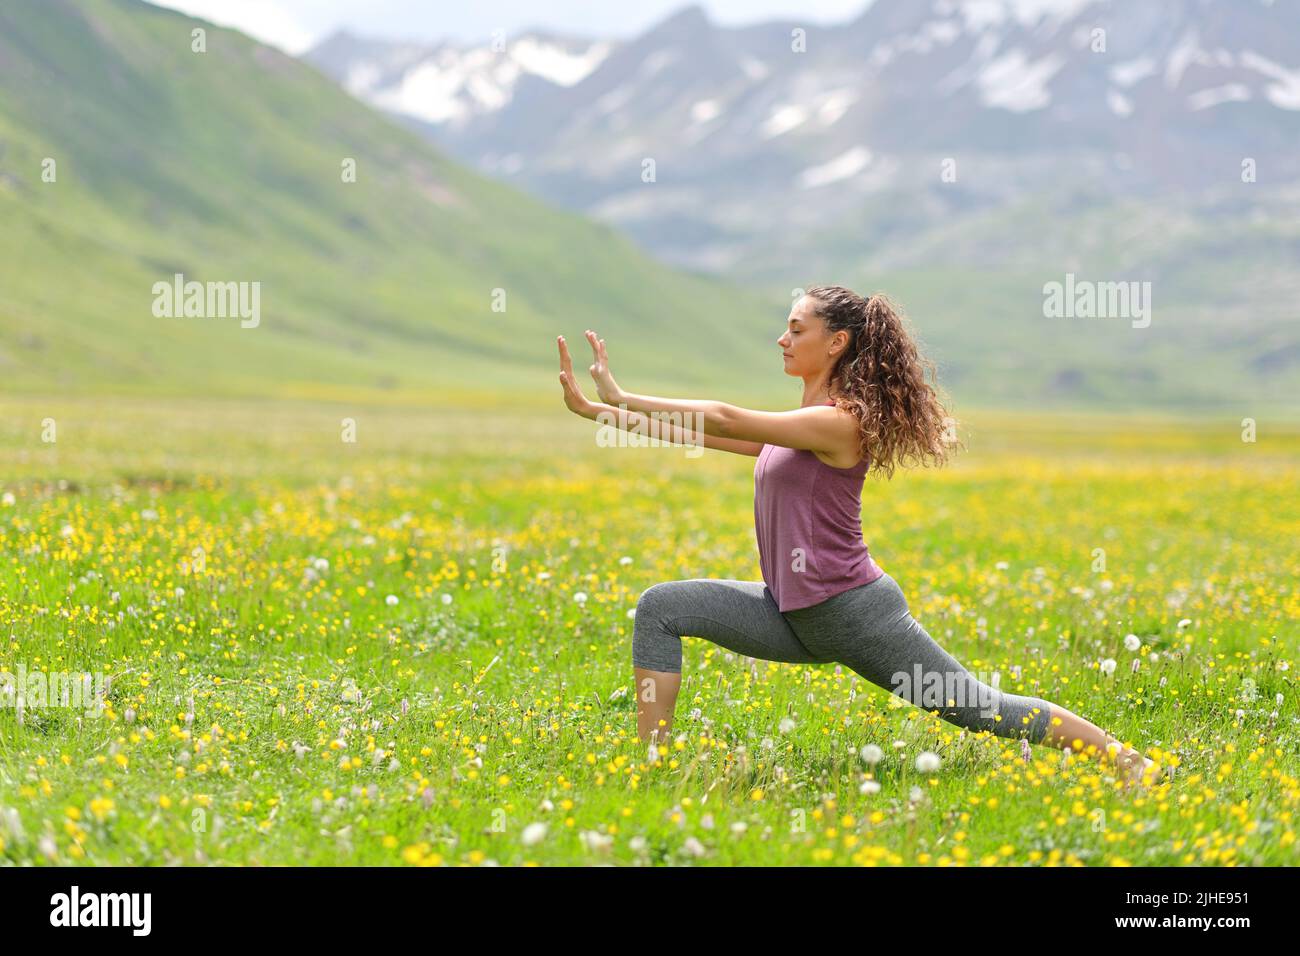 Profile of a woman practicing tai chi in a high mountain field Stock Photo